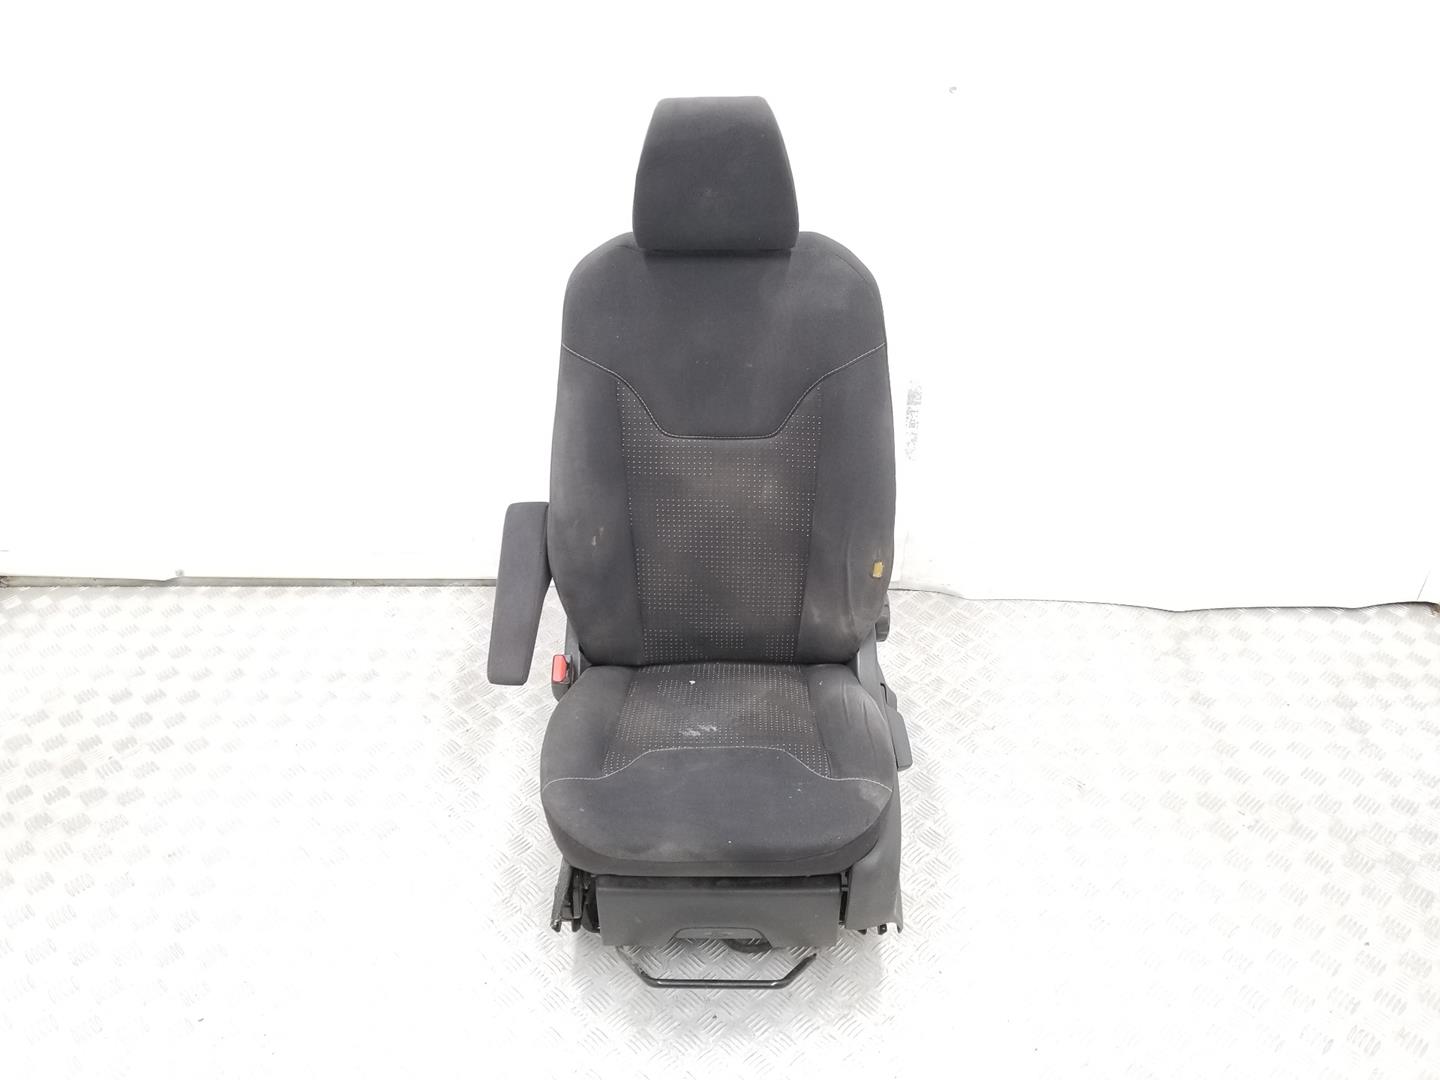 FORD Transit 70 Series (1984-2024) Front Left Seat ASIENTOTELA, ASIENTOMANUAL, LADOCONDUCTOR 19795325